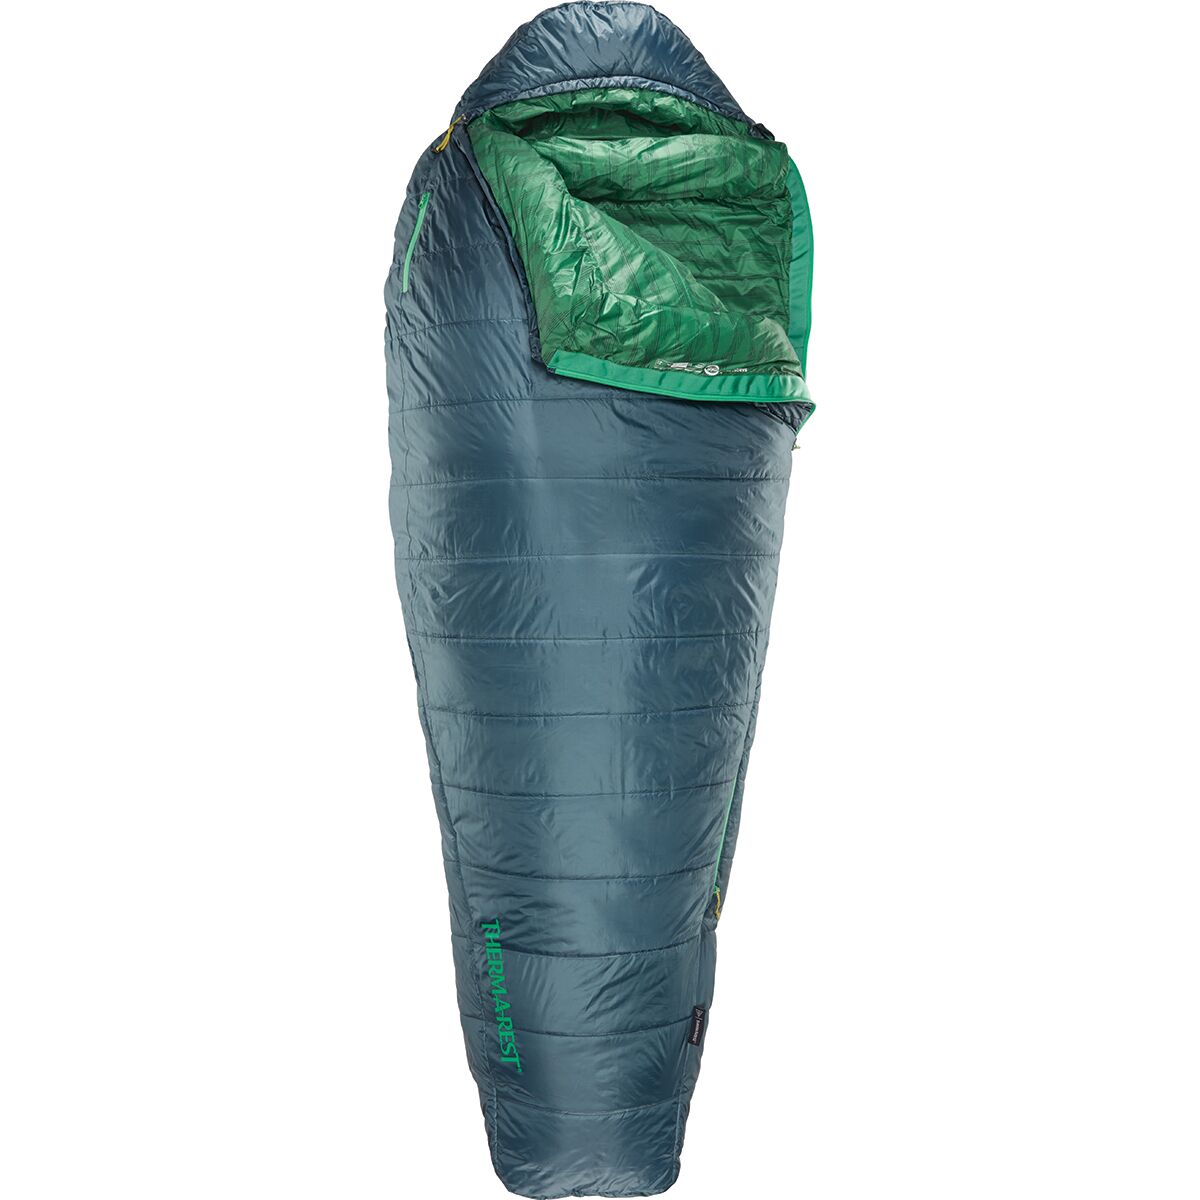 Therm-a-Rest Saros Sleeping Bag: 32F Synthetic